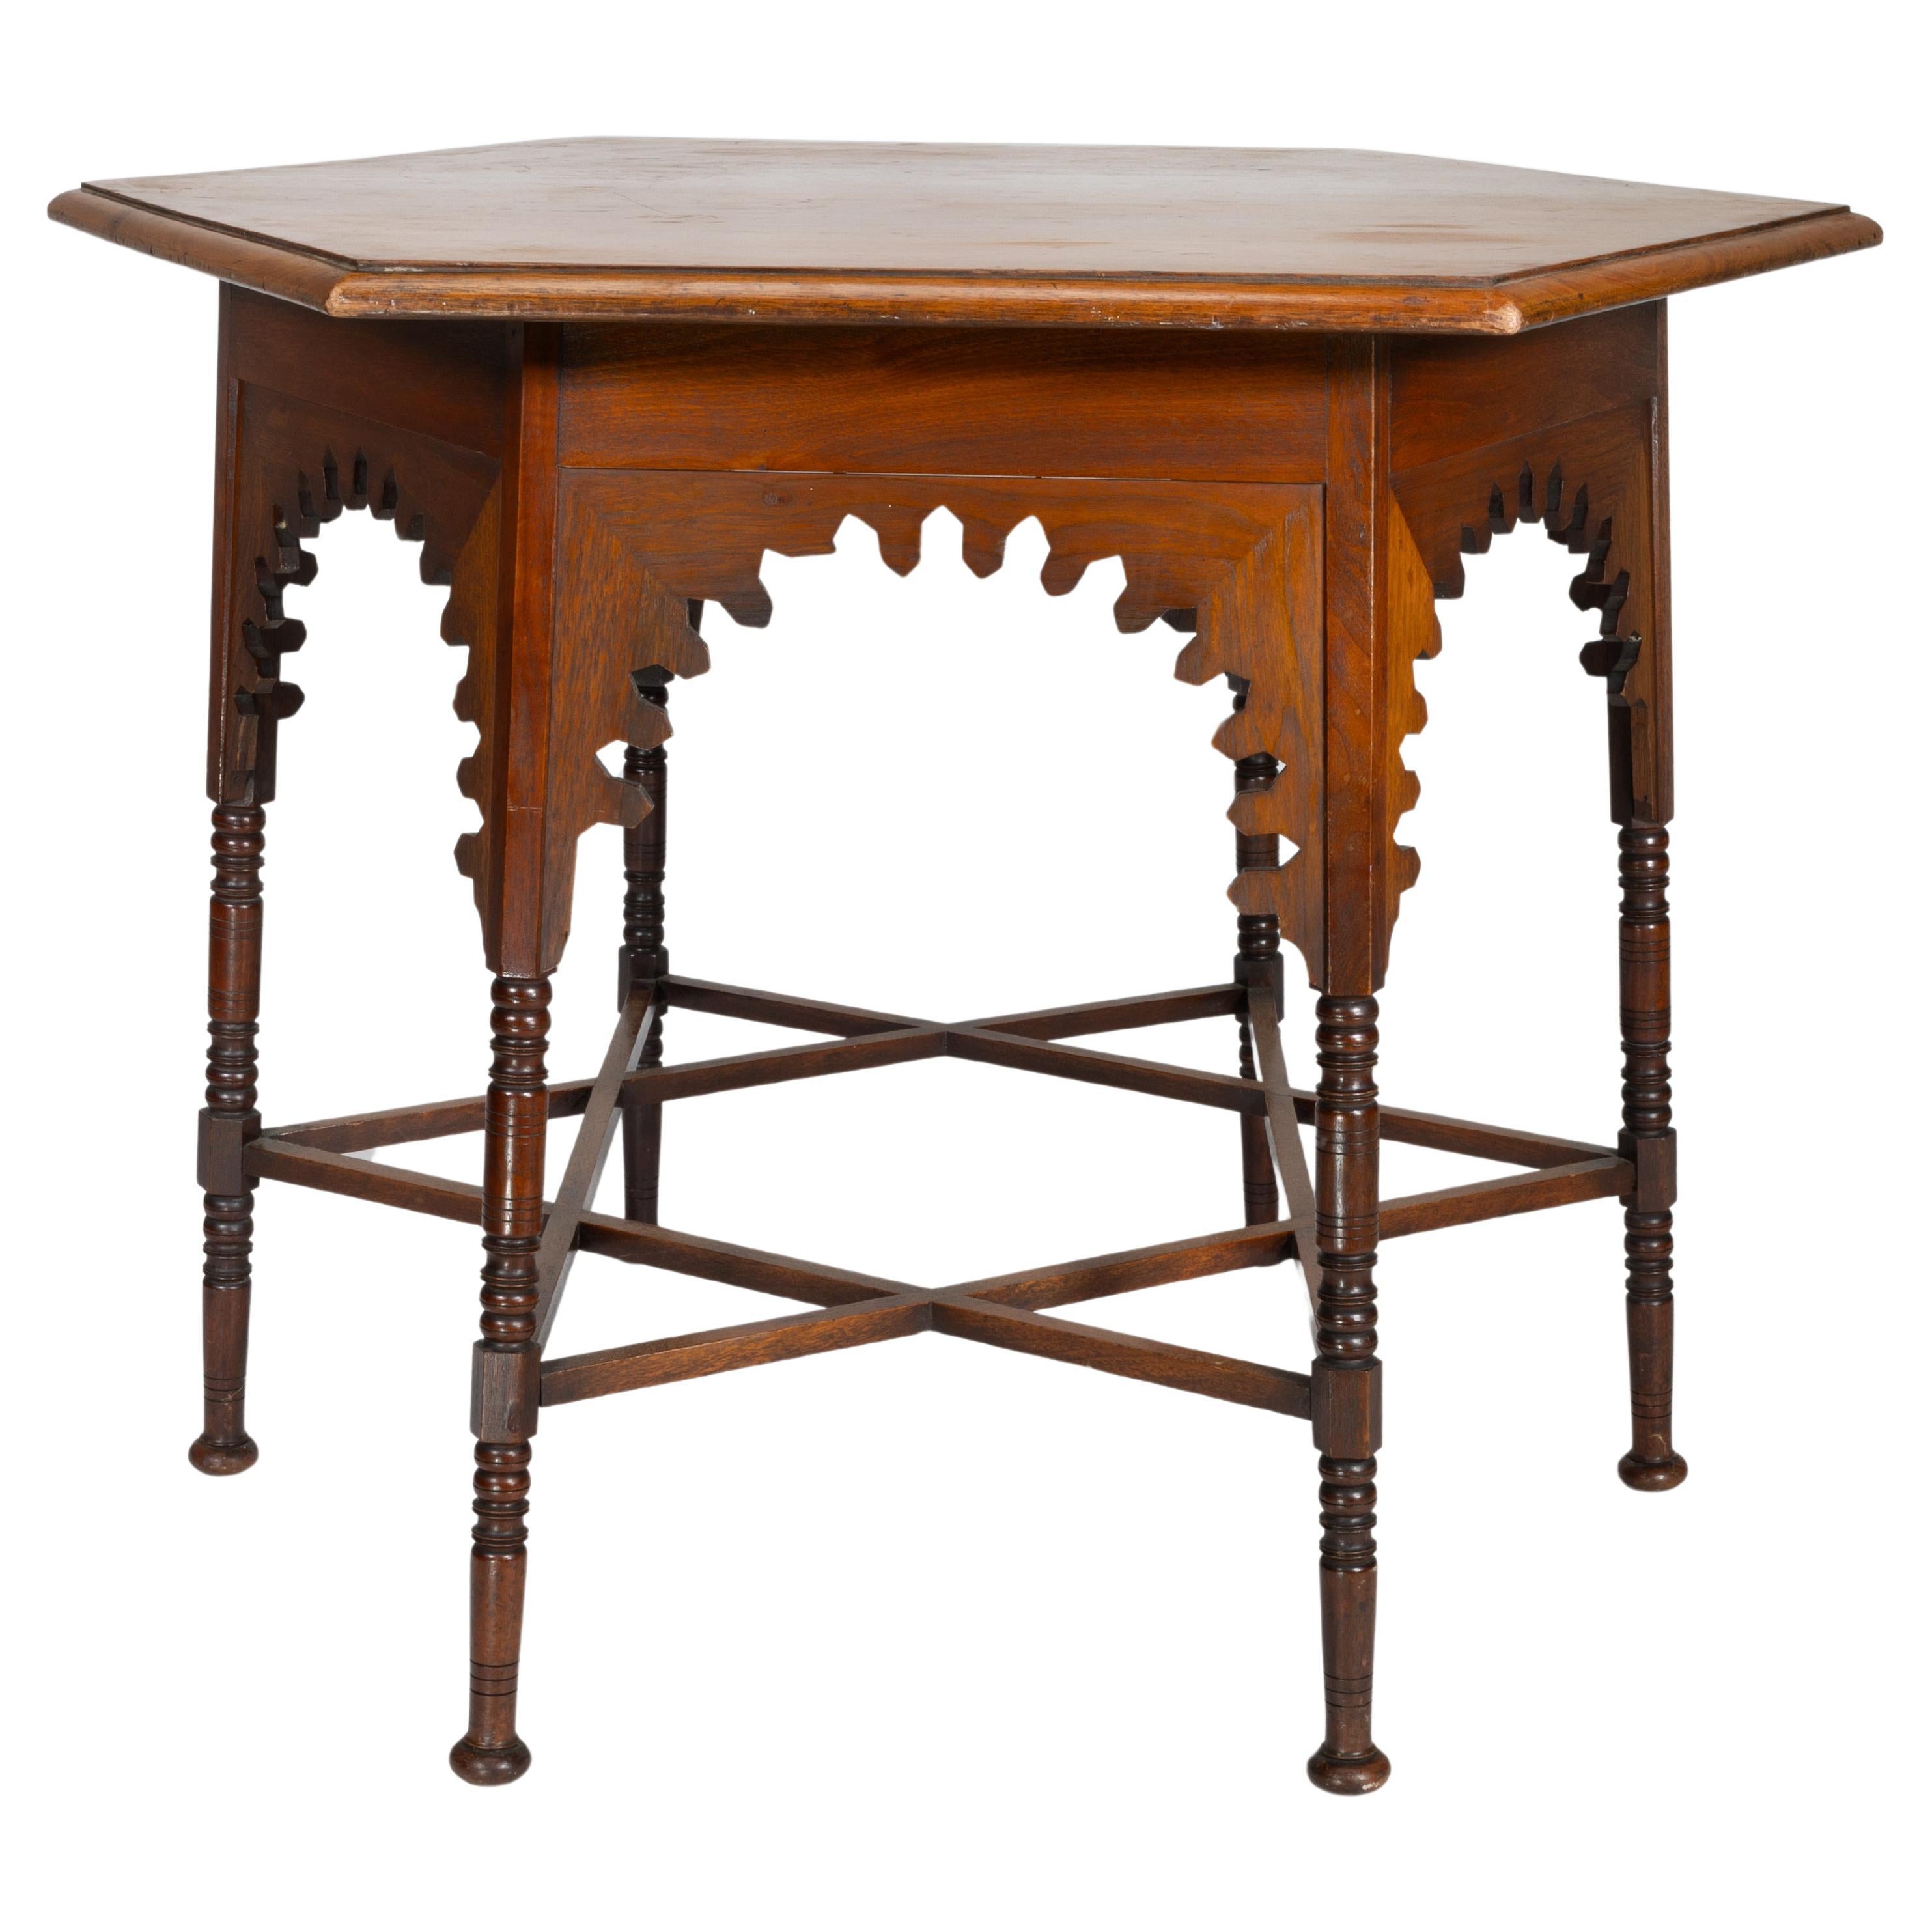 Liberty & Co. An Arts & Crafts walnut centre table with arched aprons